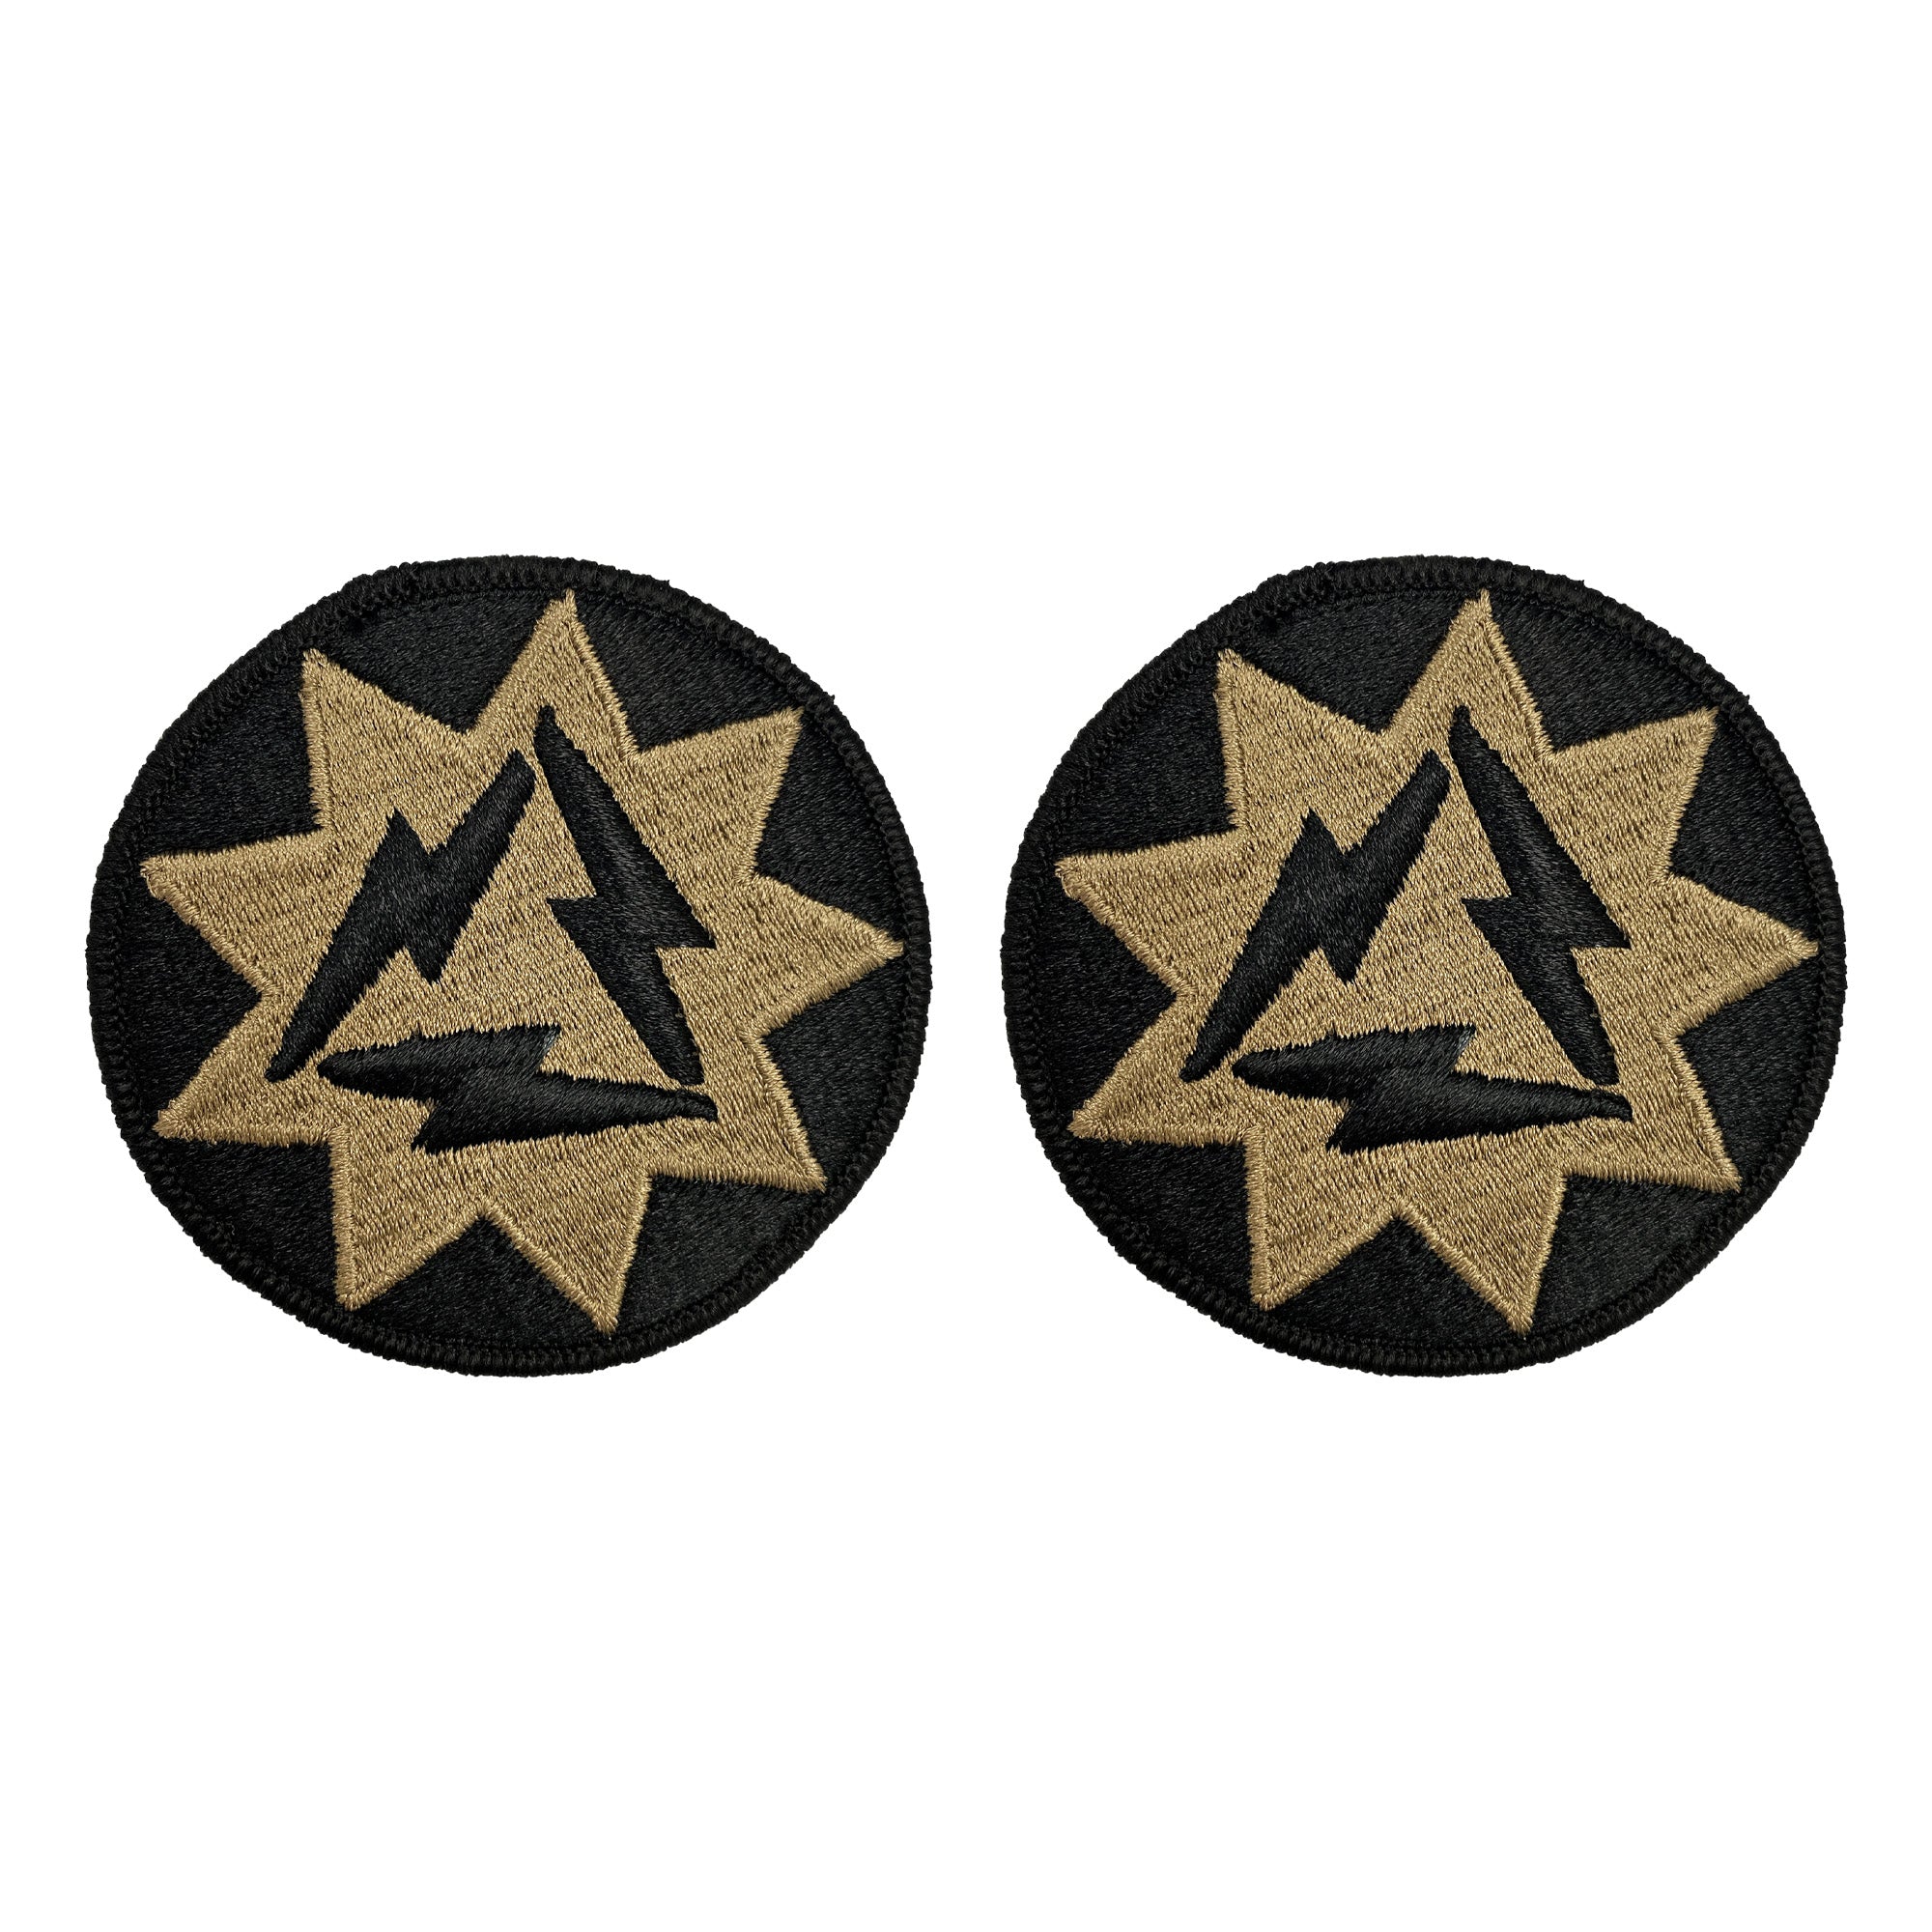 93rd Signal Brigade OCP Patch with Hook Fastener (pair) - Insignia Depot